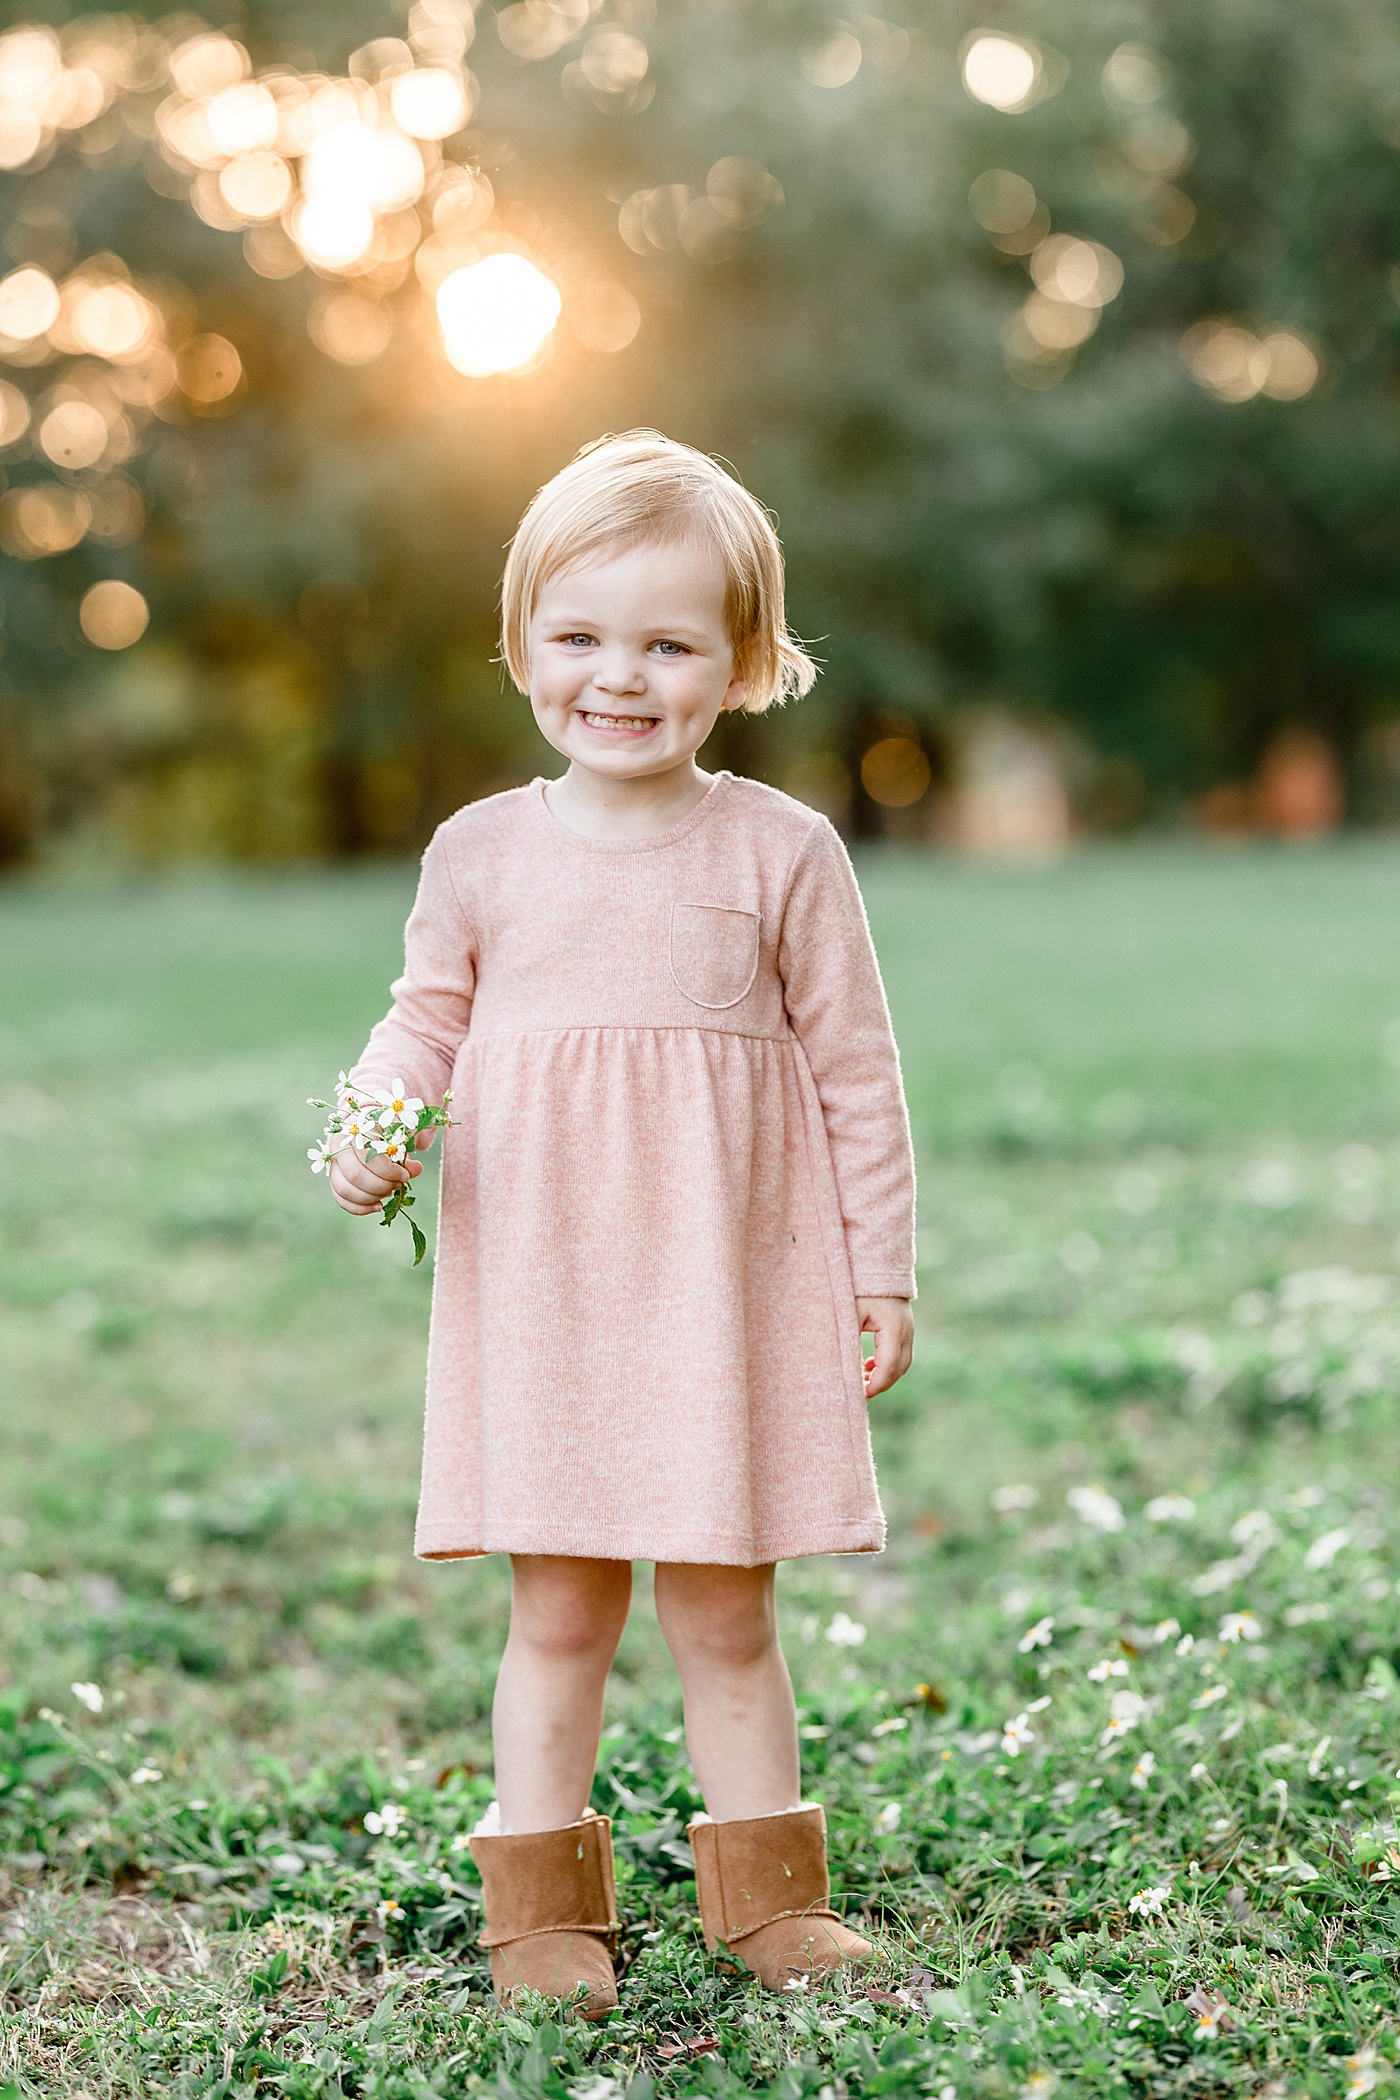 Two year old little girl at sunset. Photo by Brittany Elise Photography.